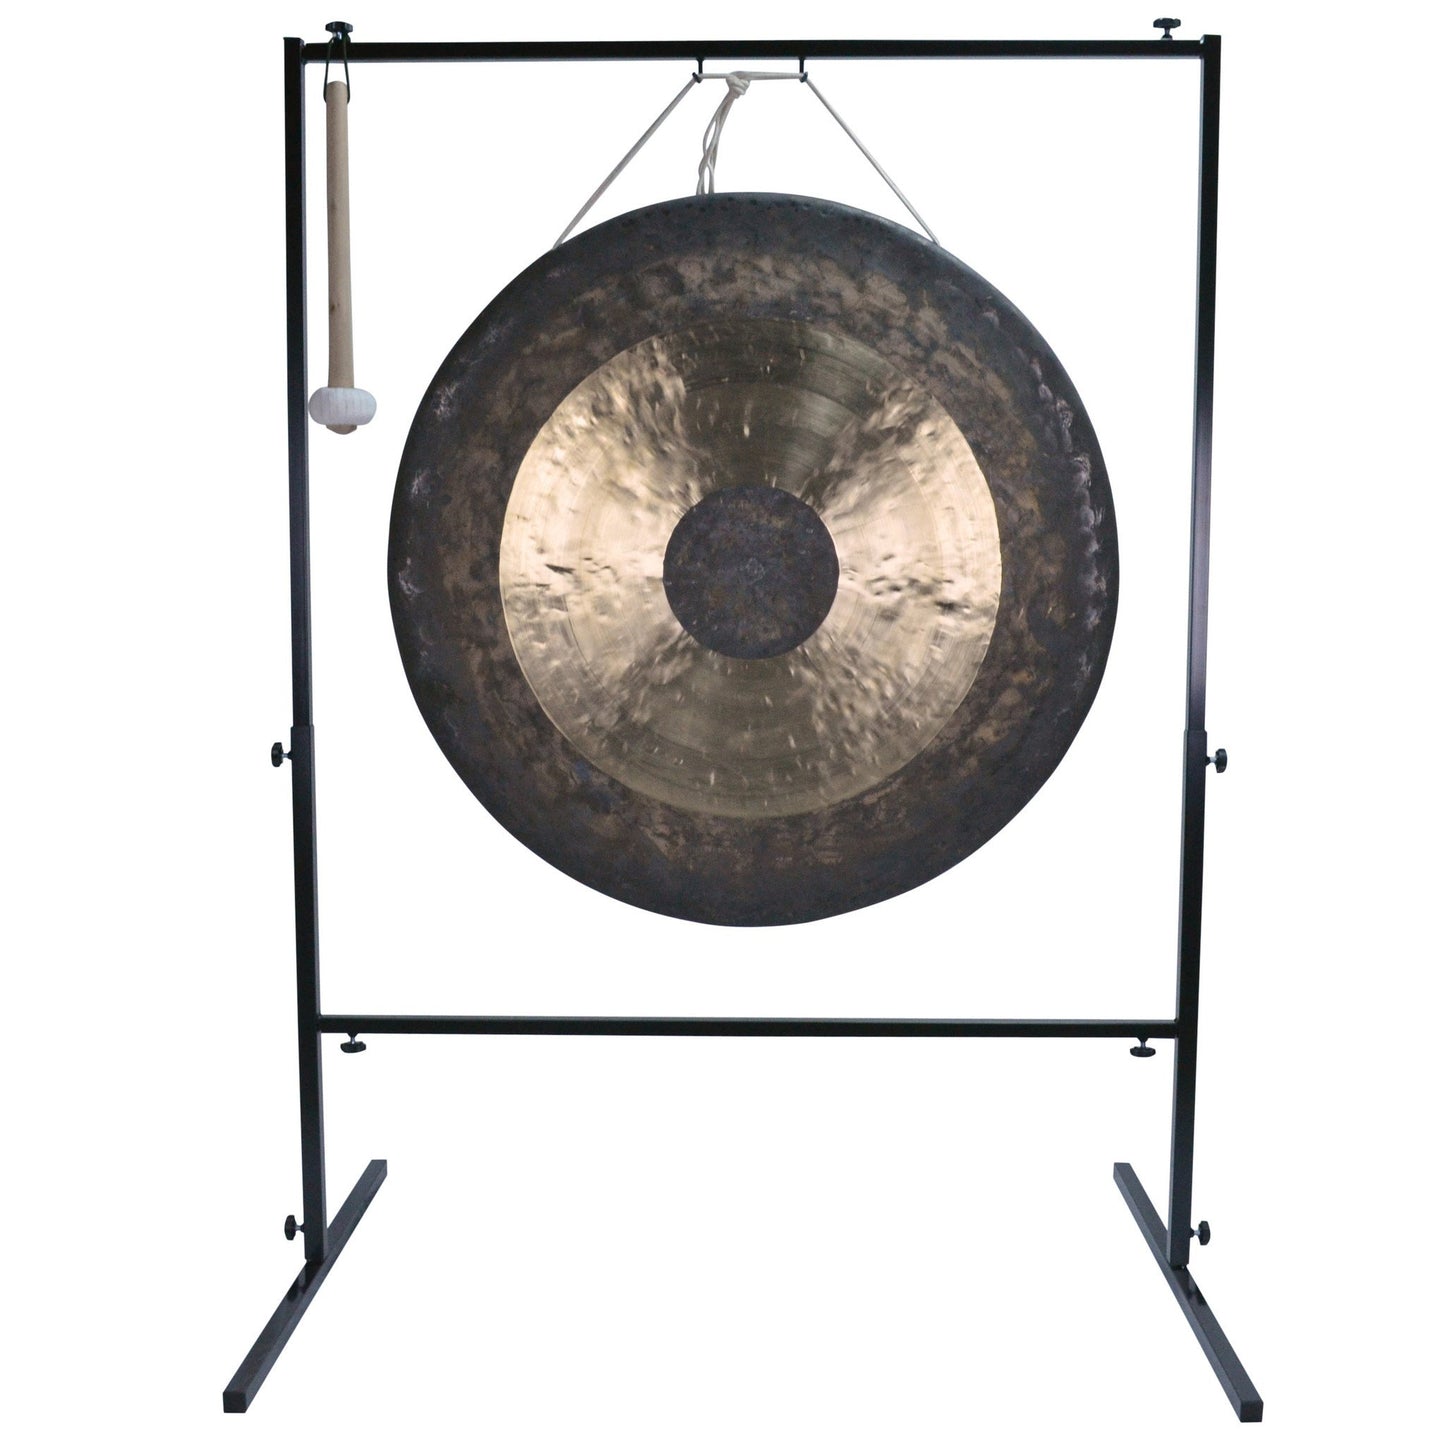 36" Chau Gong on Wuhan Gong Stand with Mallet